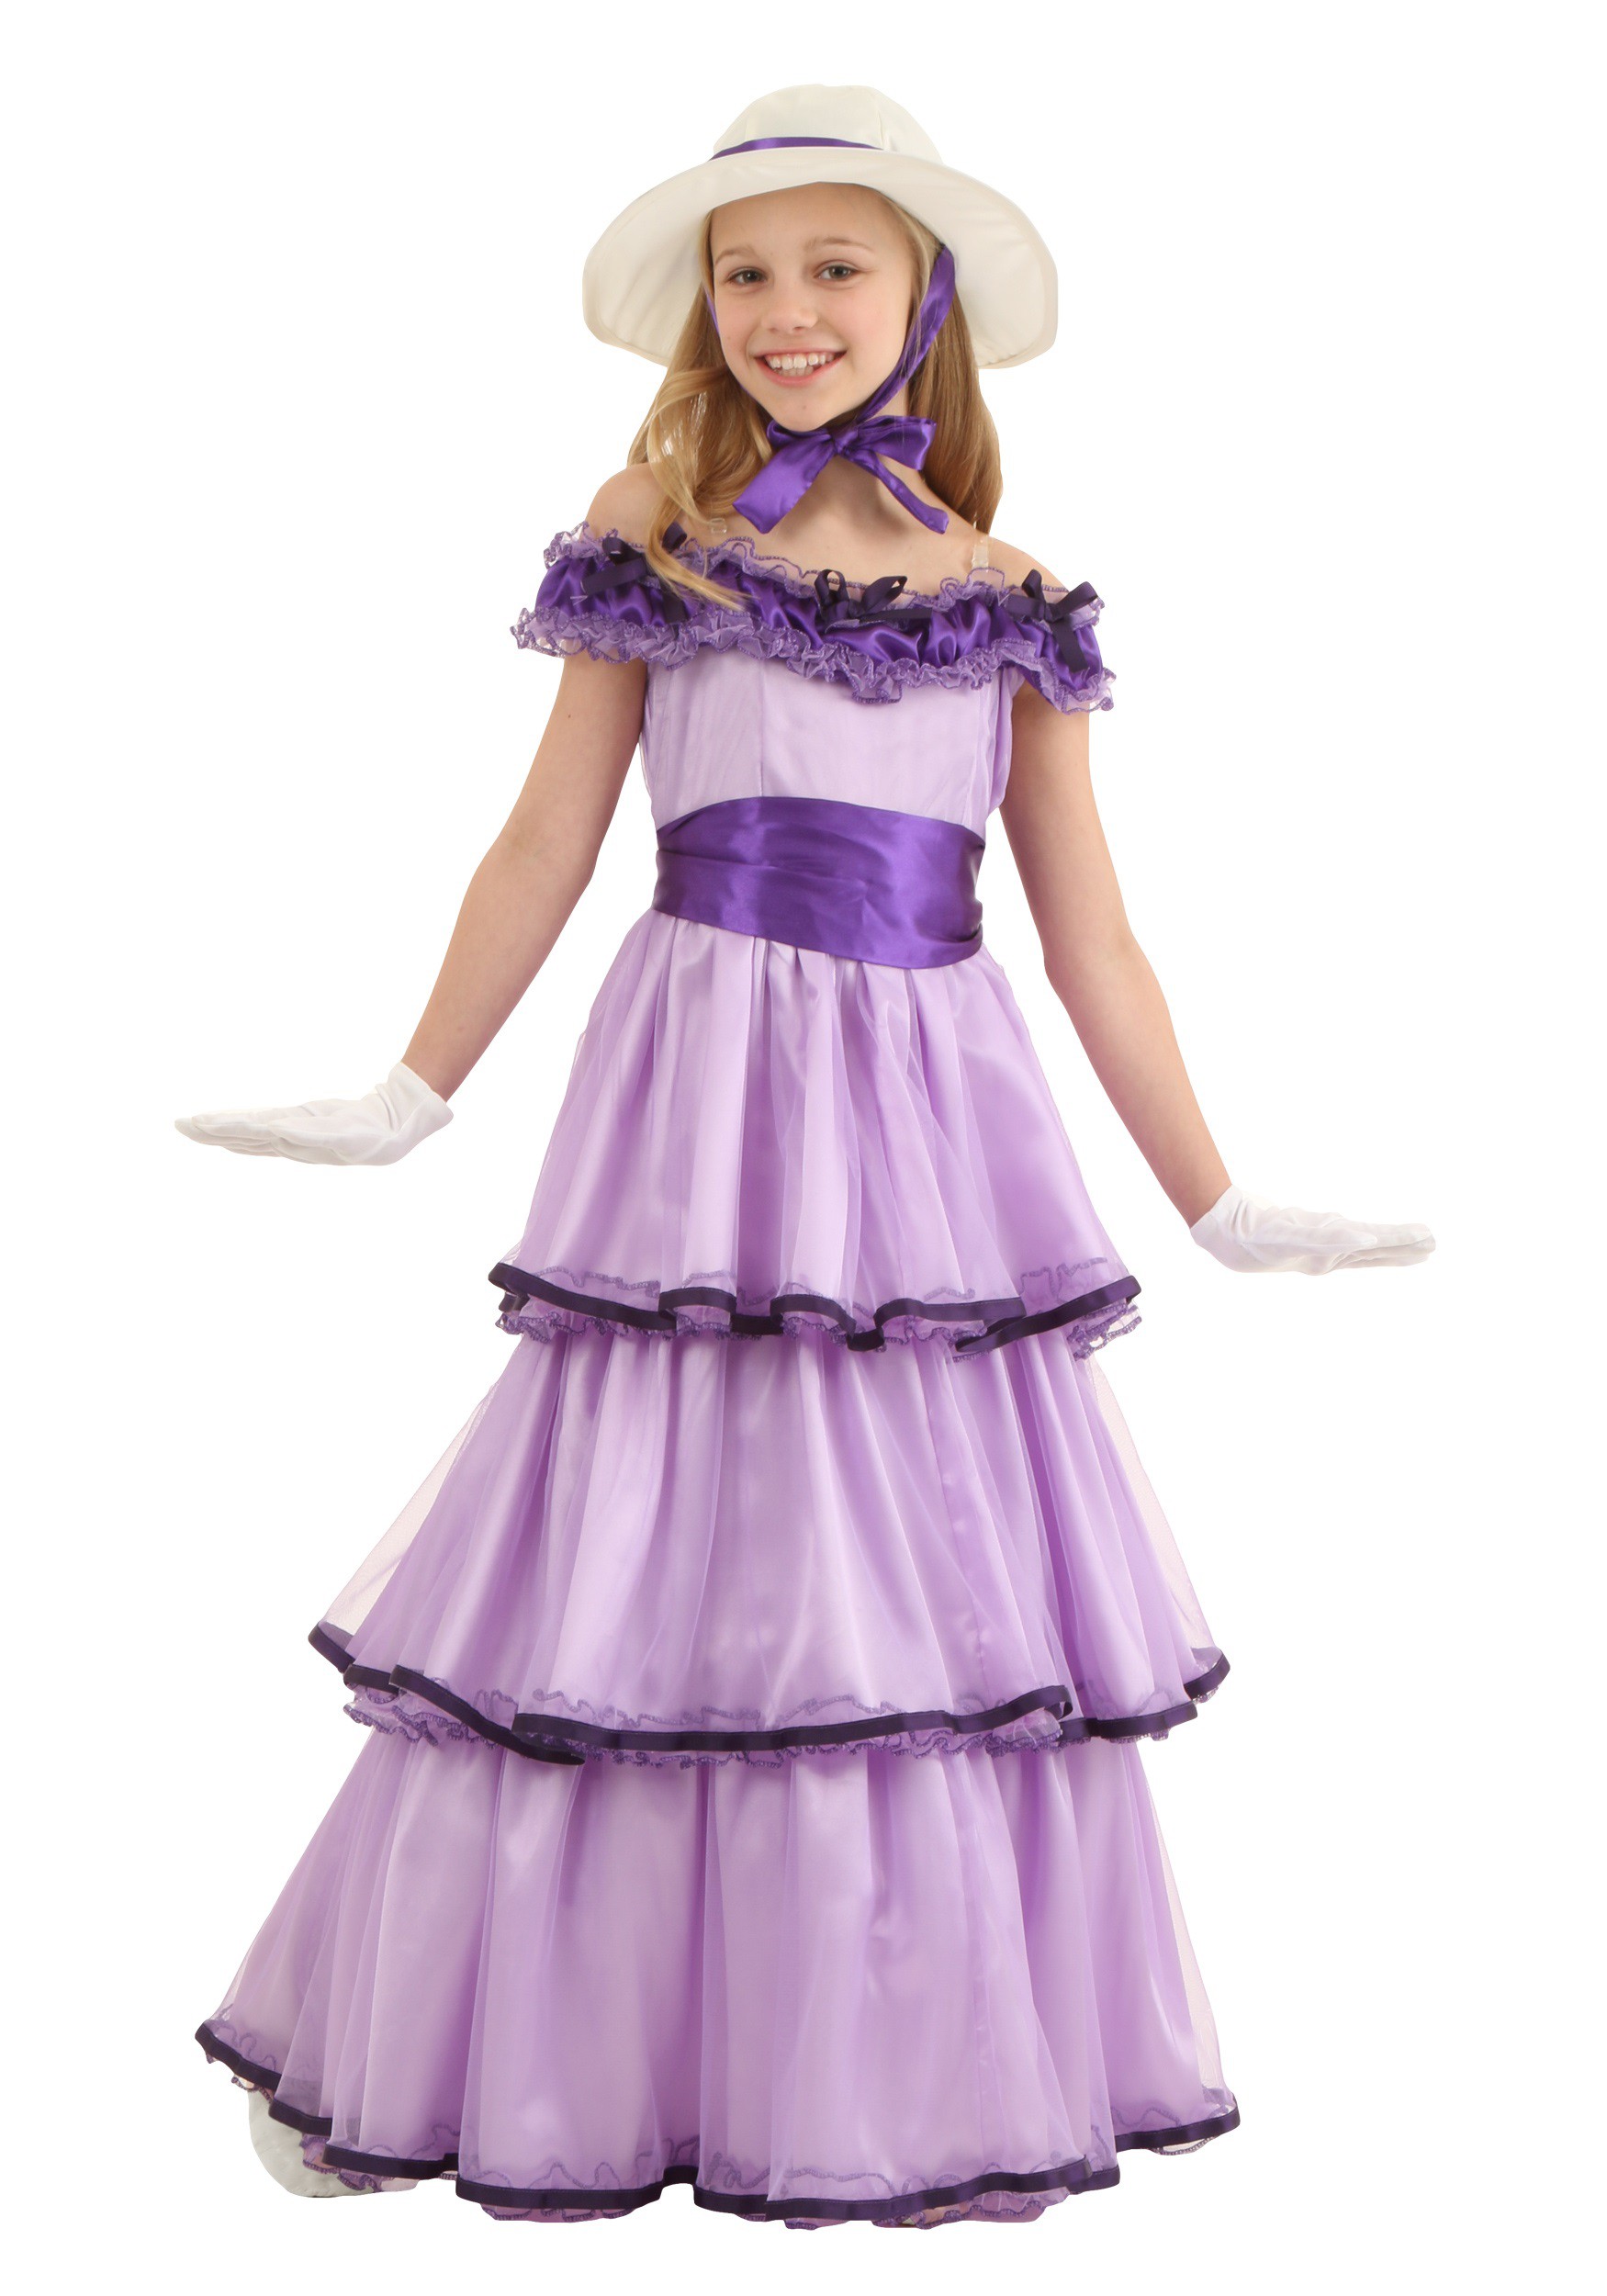 Photos - Fancy Dress Deluxe FUN Costumes Kid's  Southern Belle Costume | Girl's Victorian Costum 